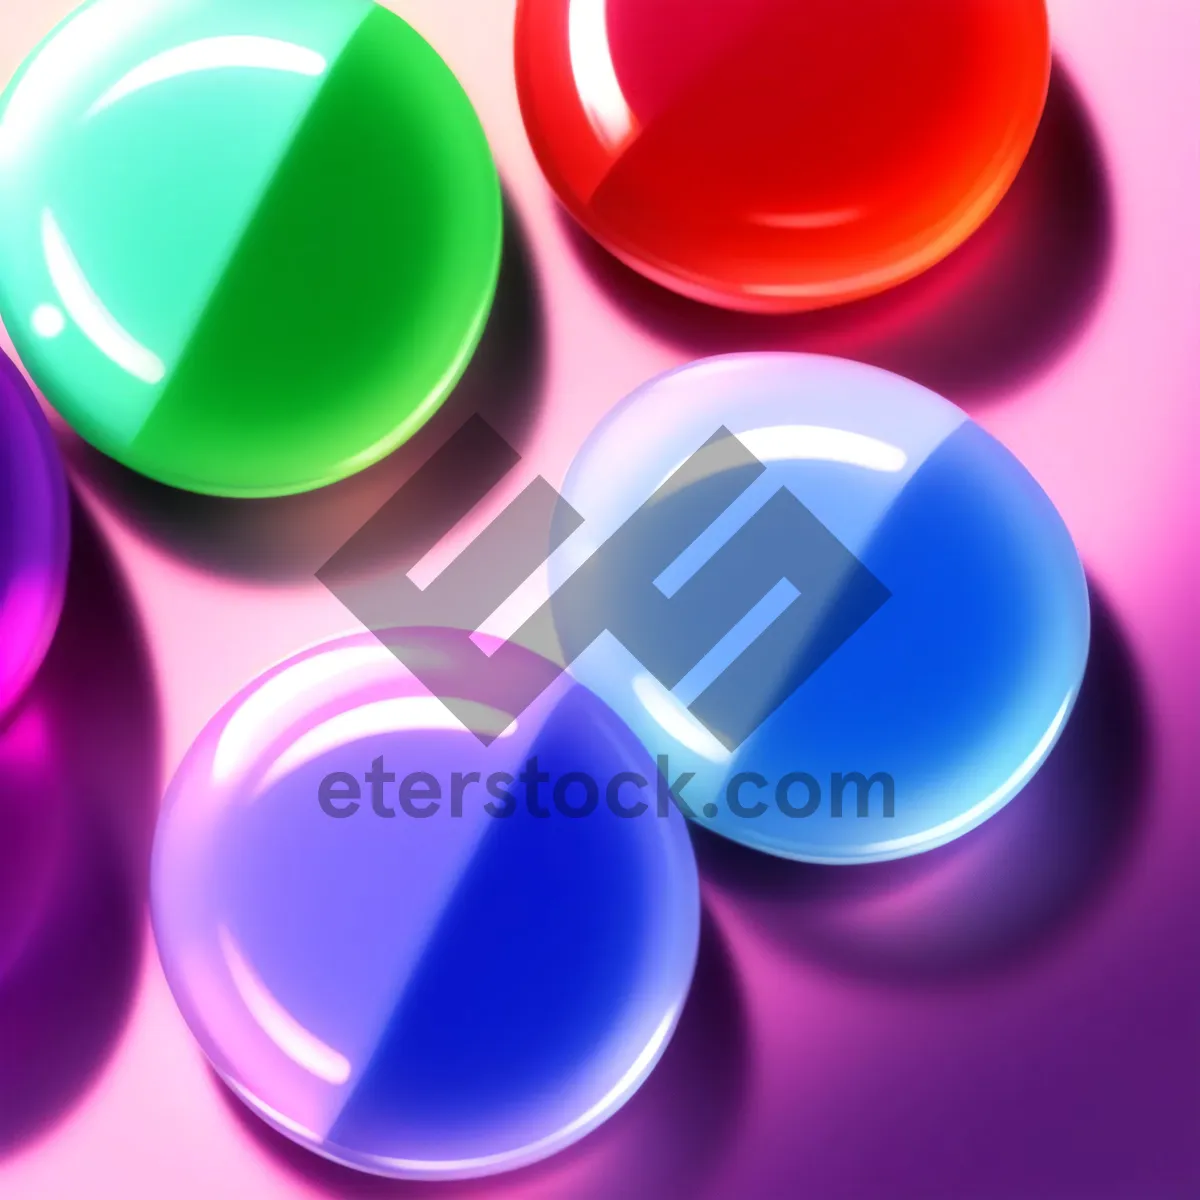 Picture of Colorful Glass Button Set with Reflections